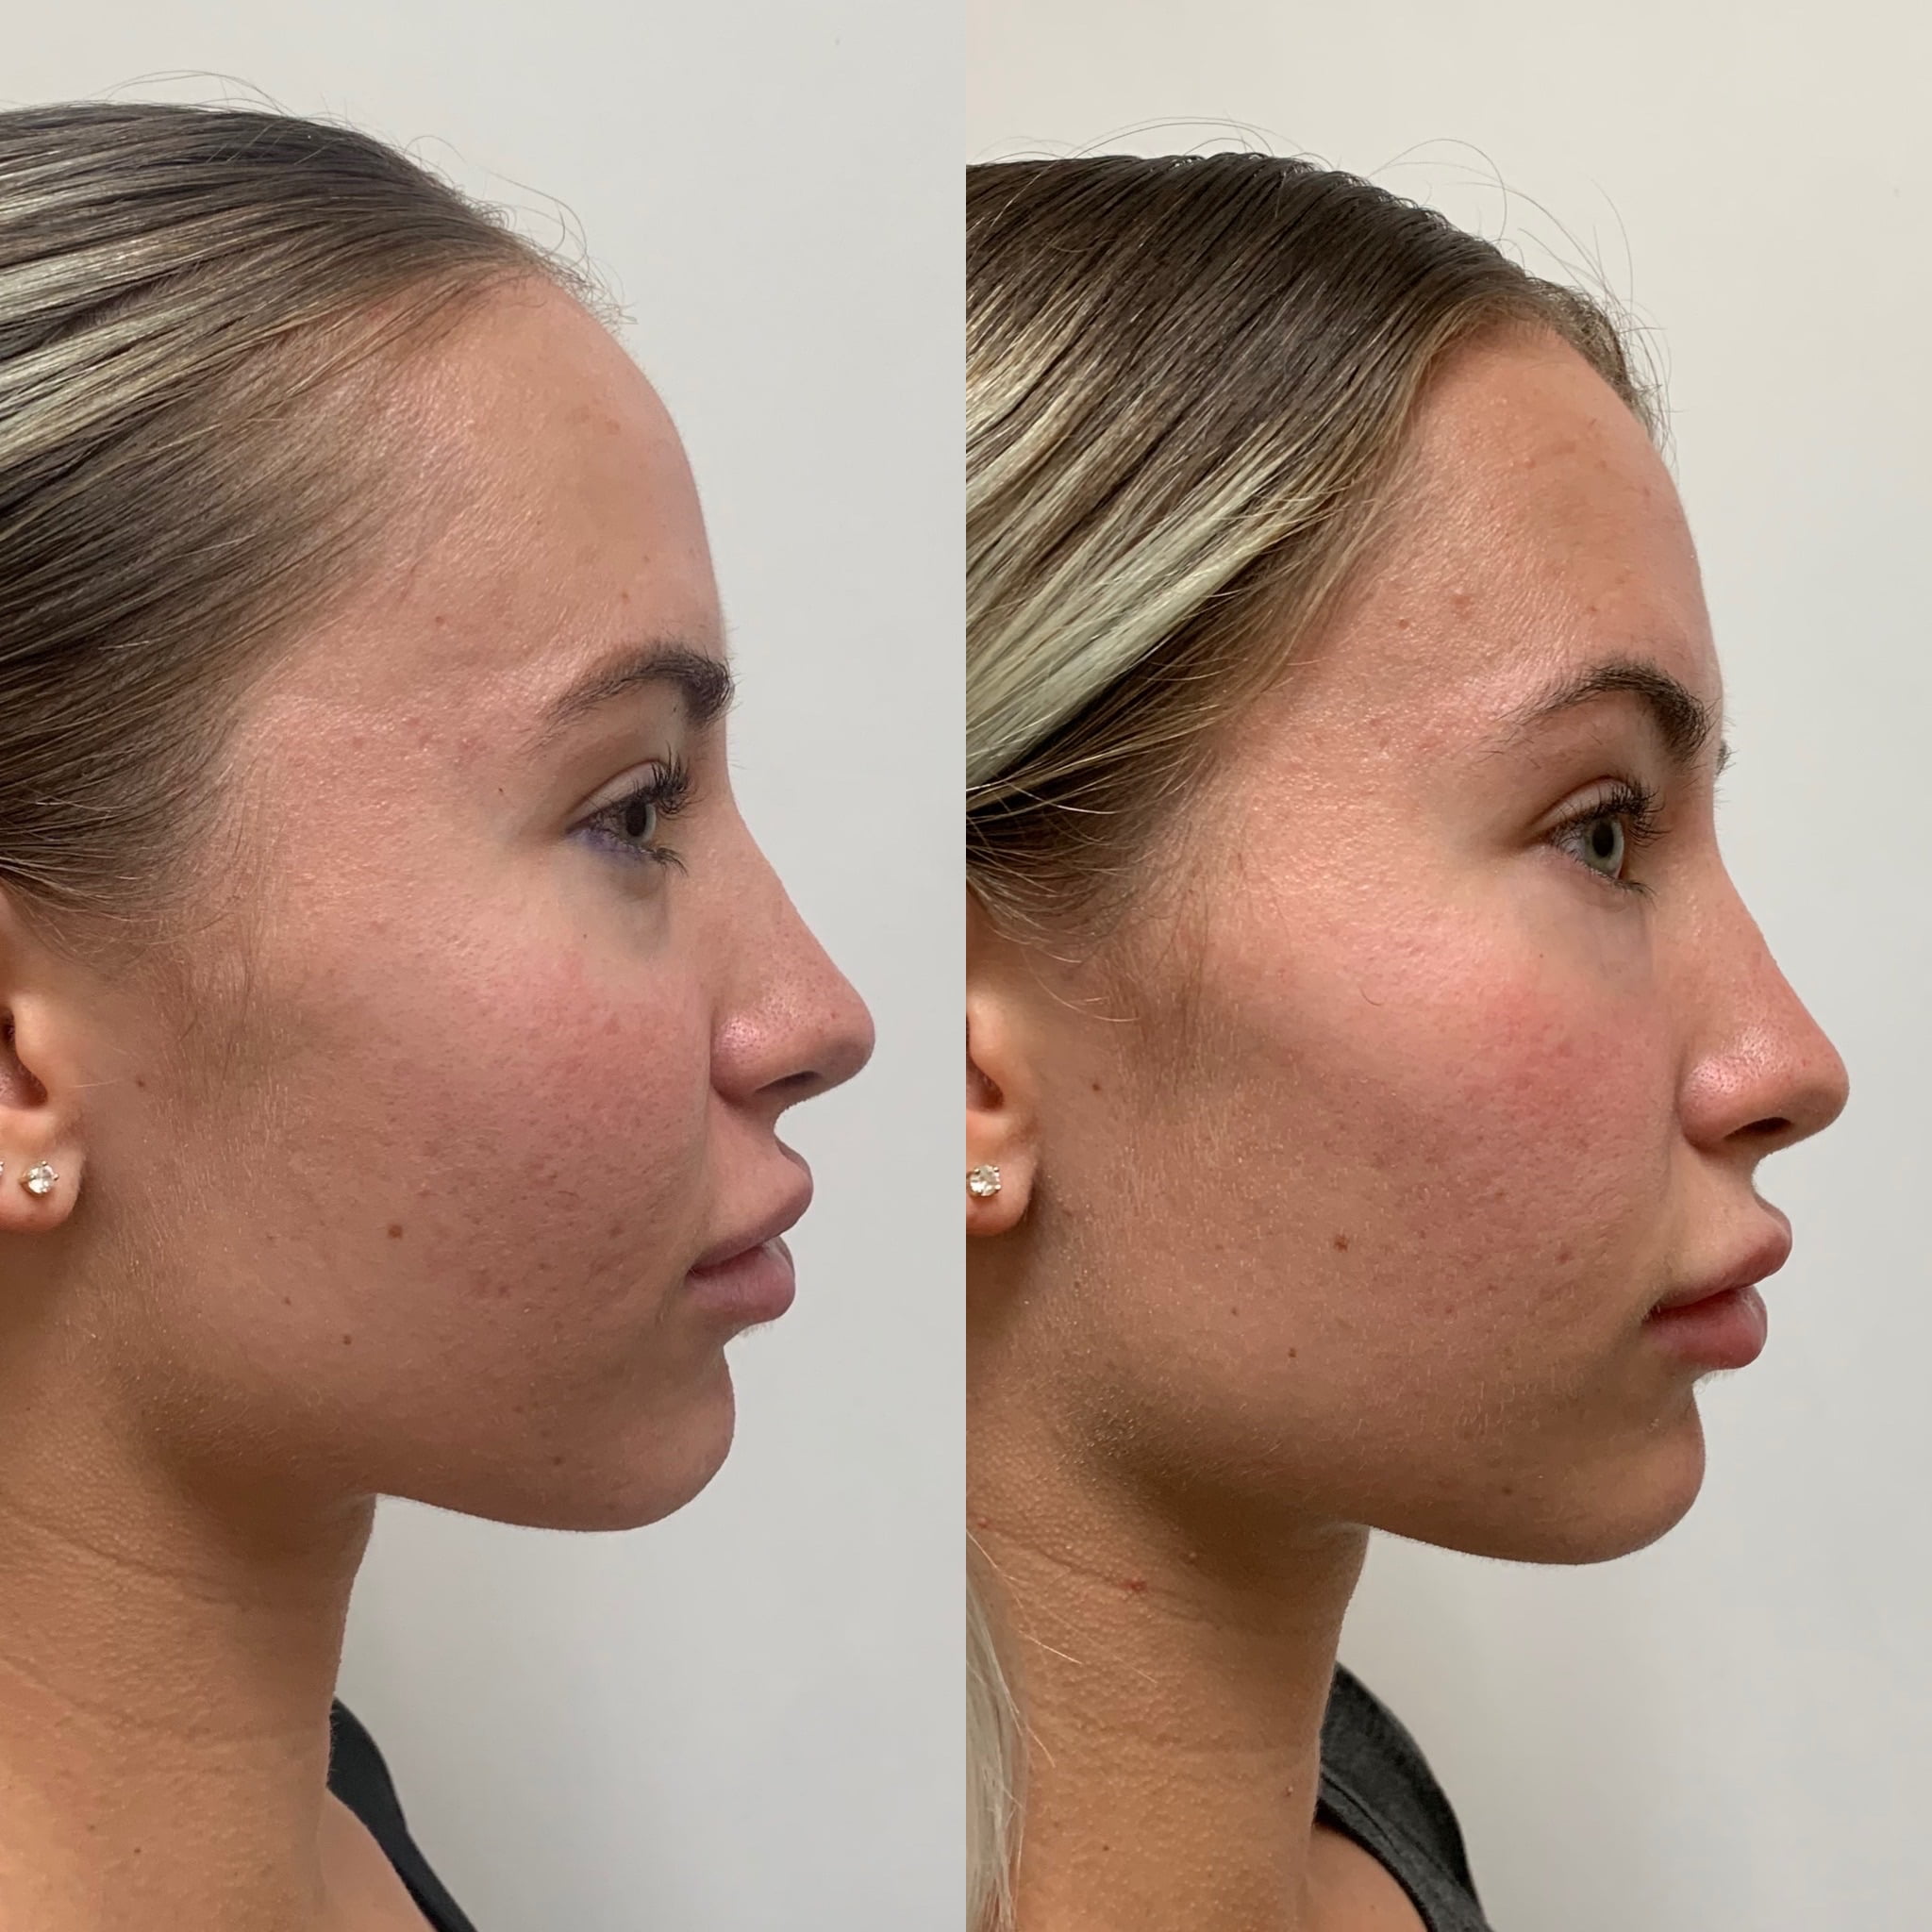 Before and After Cheeks treatment in Beauty Boost Med Spa at Newport Beach, CA